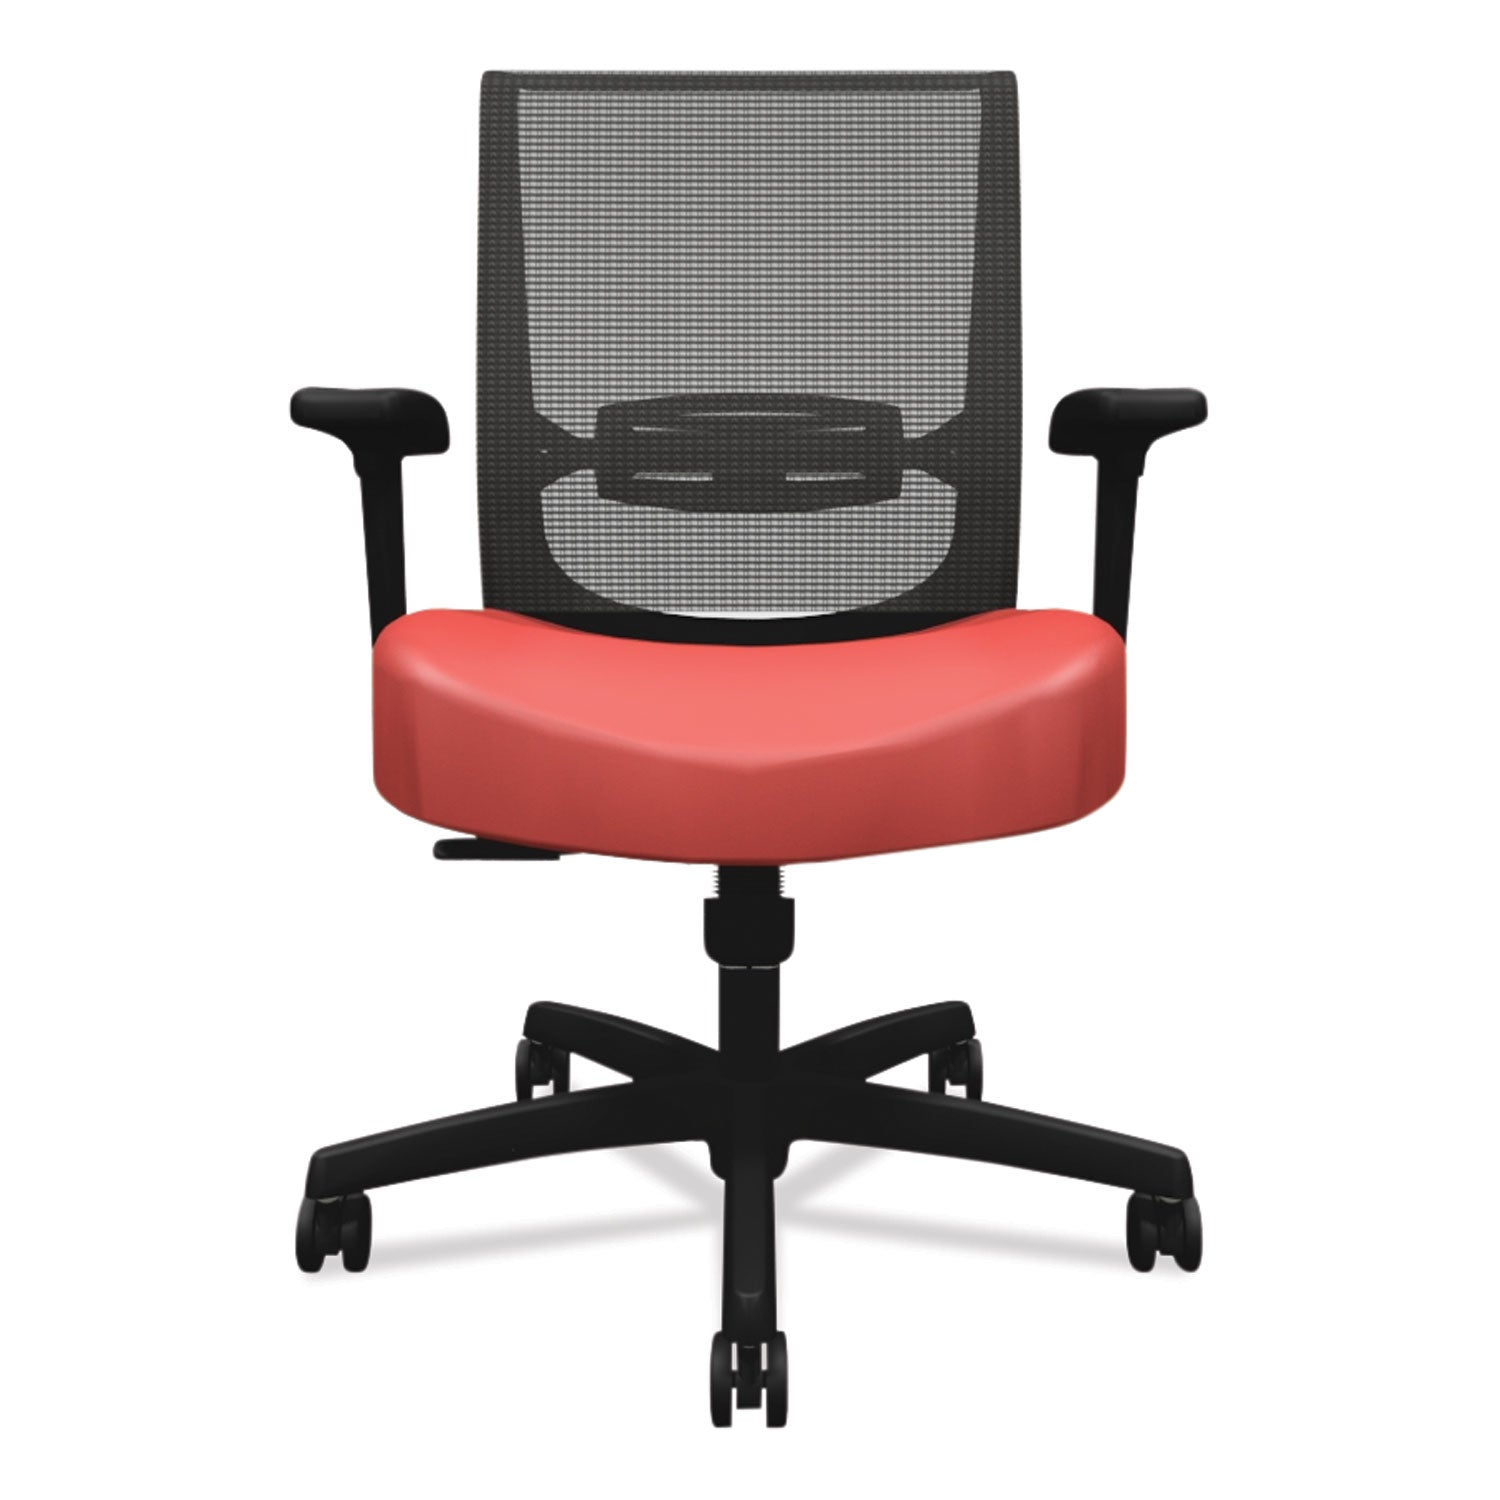 convergence-mid-back-task-chair-swivel-tilt-supports-up-to-275-lb-165-to-21-seat-height-red-seat-black-back-base_honcmz1acu67 - 2